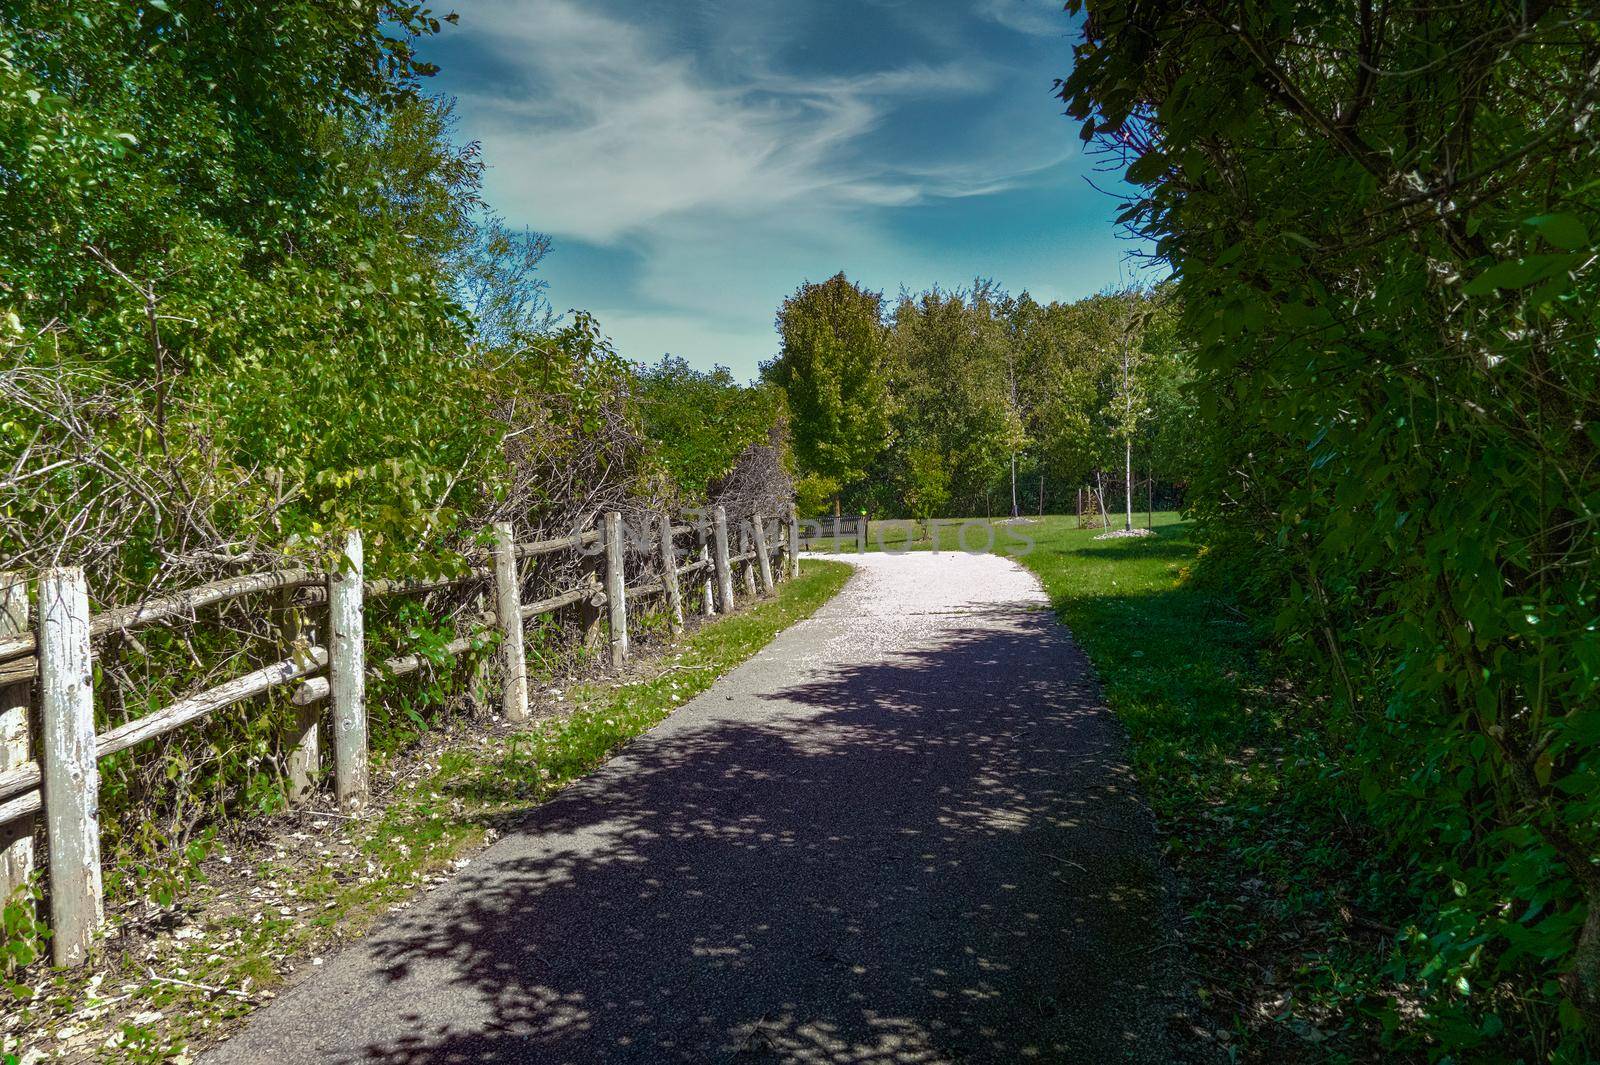 Wooden fence made of round wooden poles along the turn of the road in the park